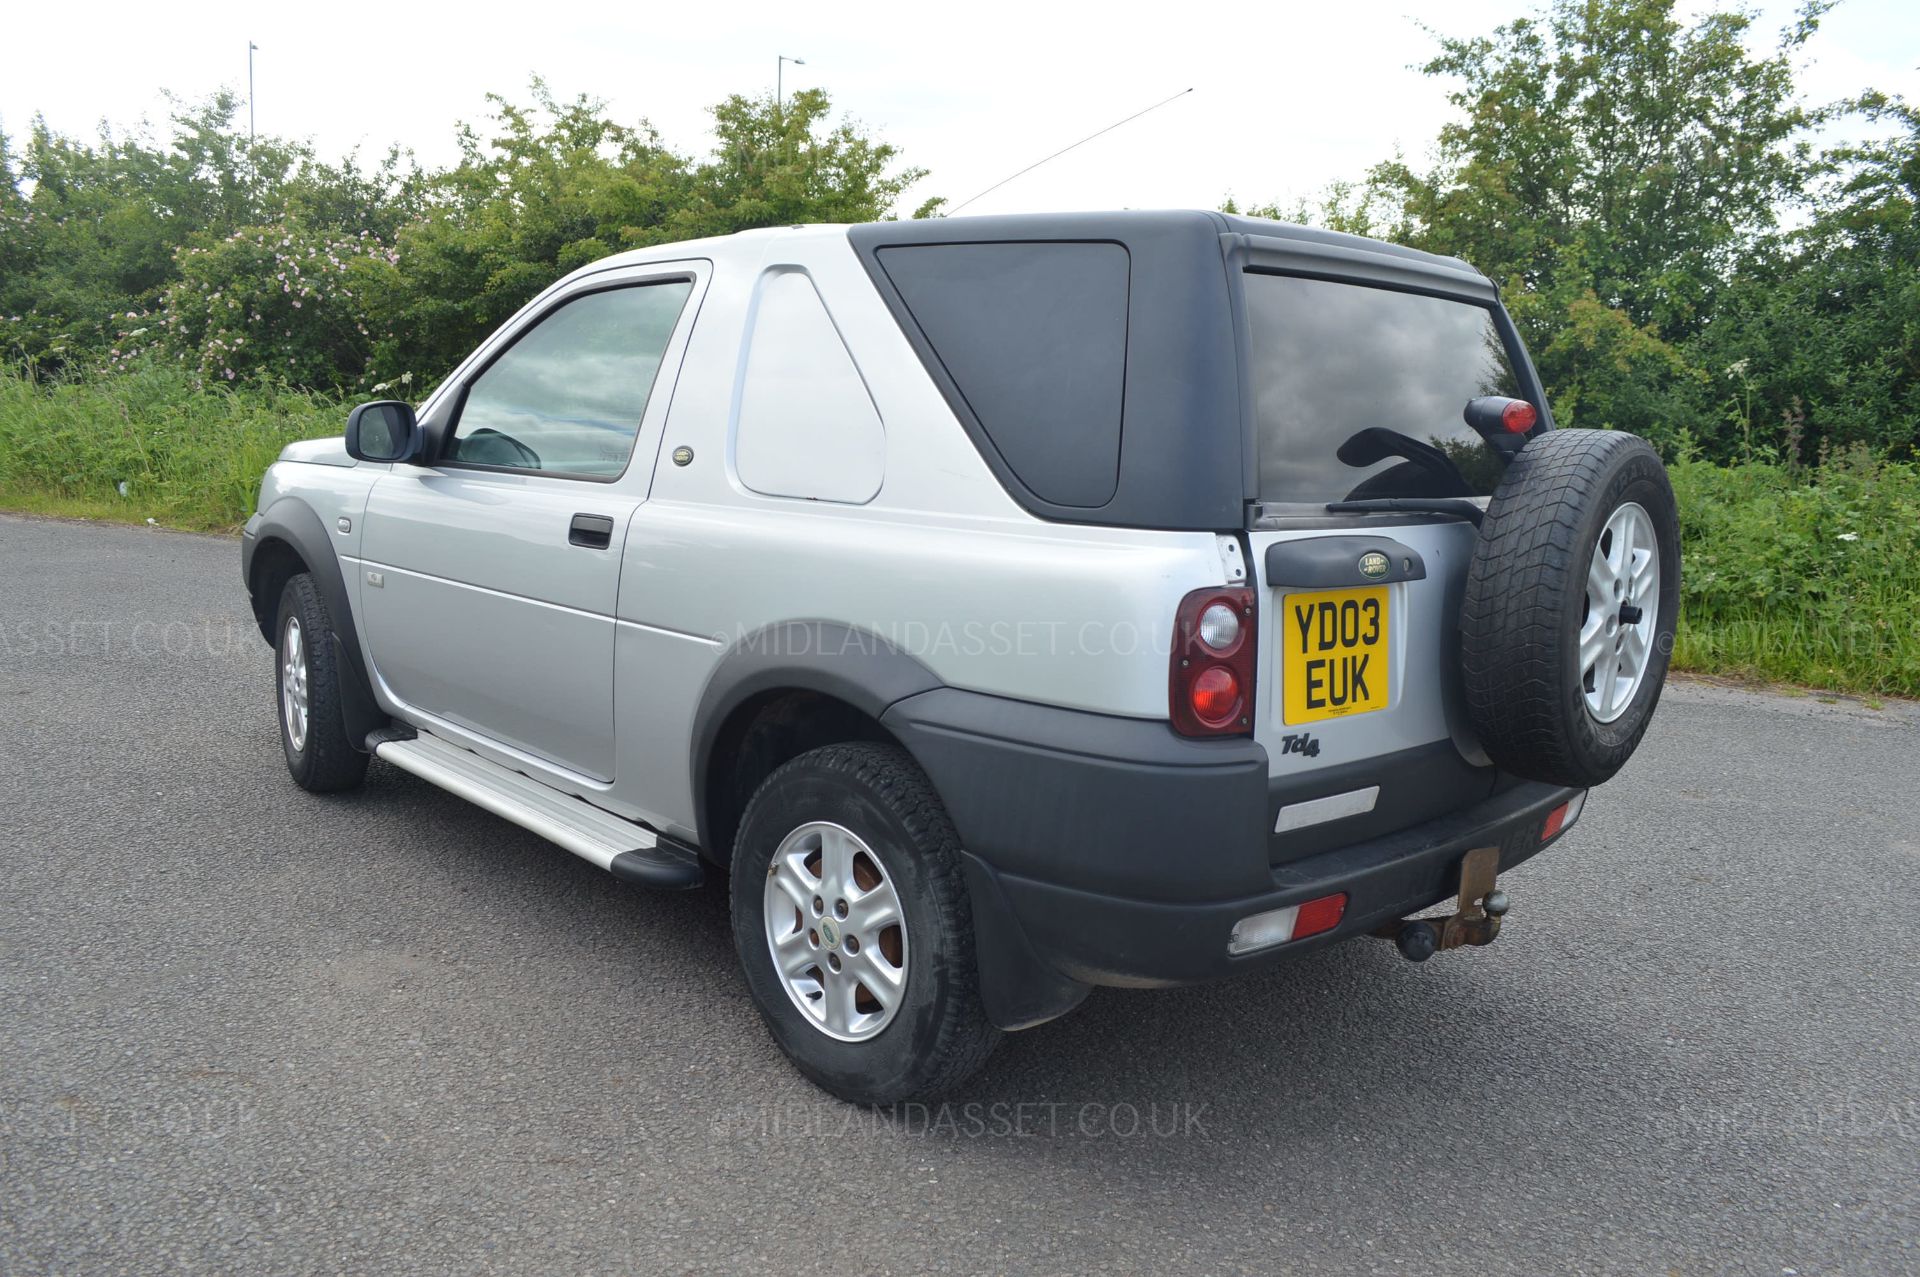 2003/03 REG LAND ROVER FREELANDER 3DR 2.0 TD4 SWB COMMERCIAL 4X4 SPECIAL VEHICLE - AIR CON *NO VAT* - Image 5 of 42